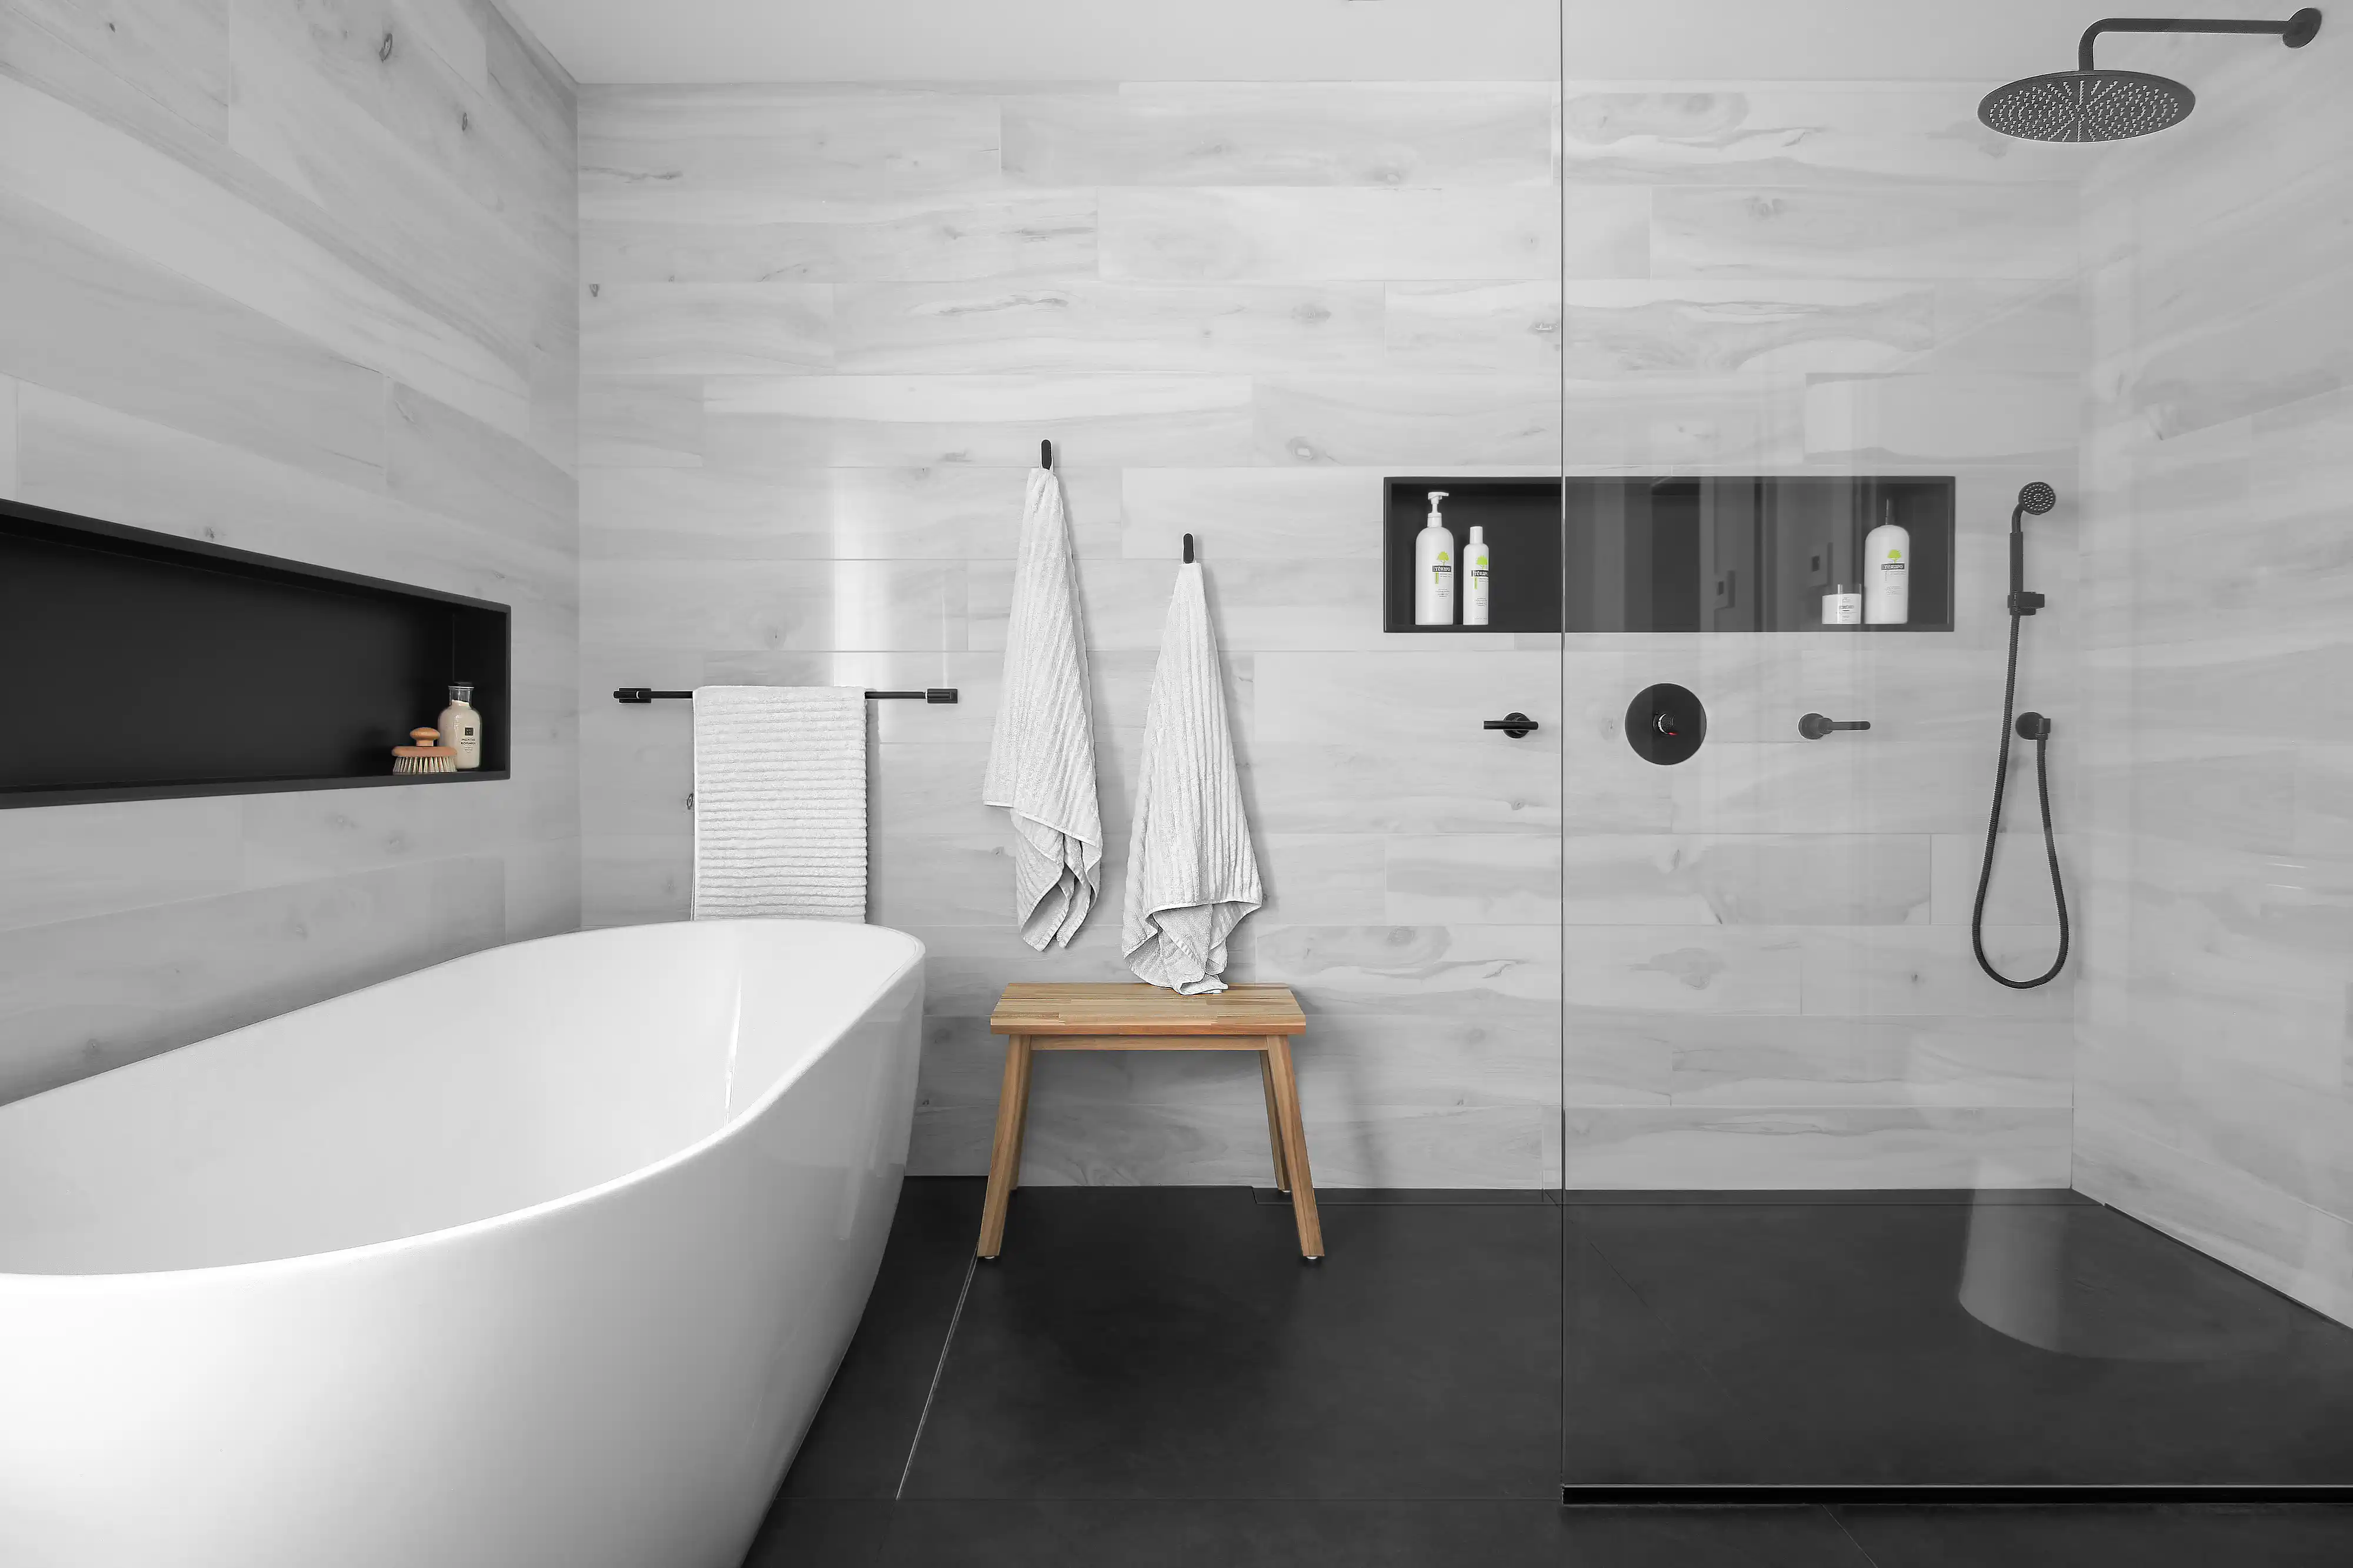 Modern bathroom with a black and white color scheme, featuring a white freestanding bathtub and an italian shower, interior by Sarah Brown Design